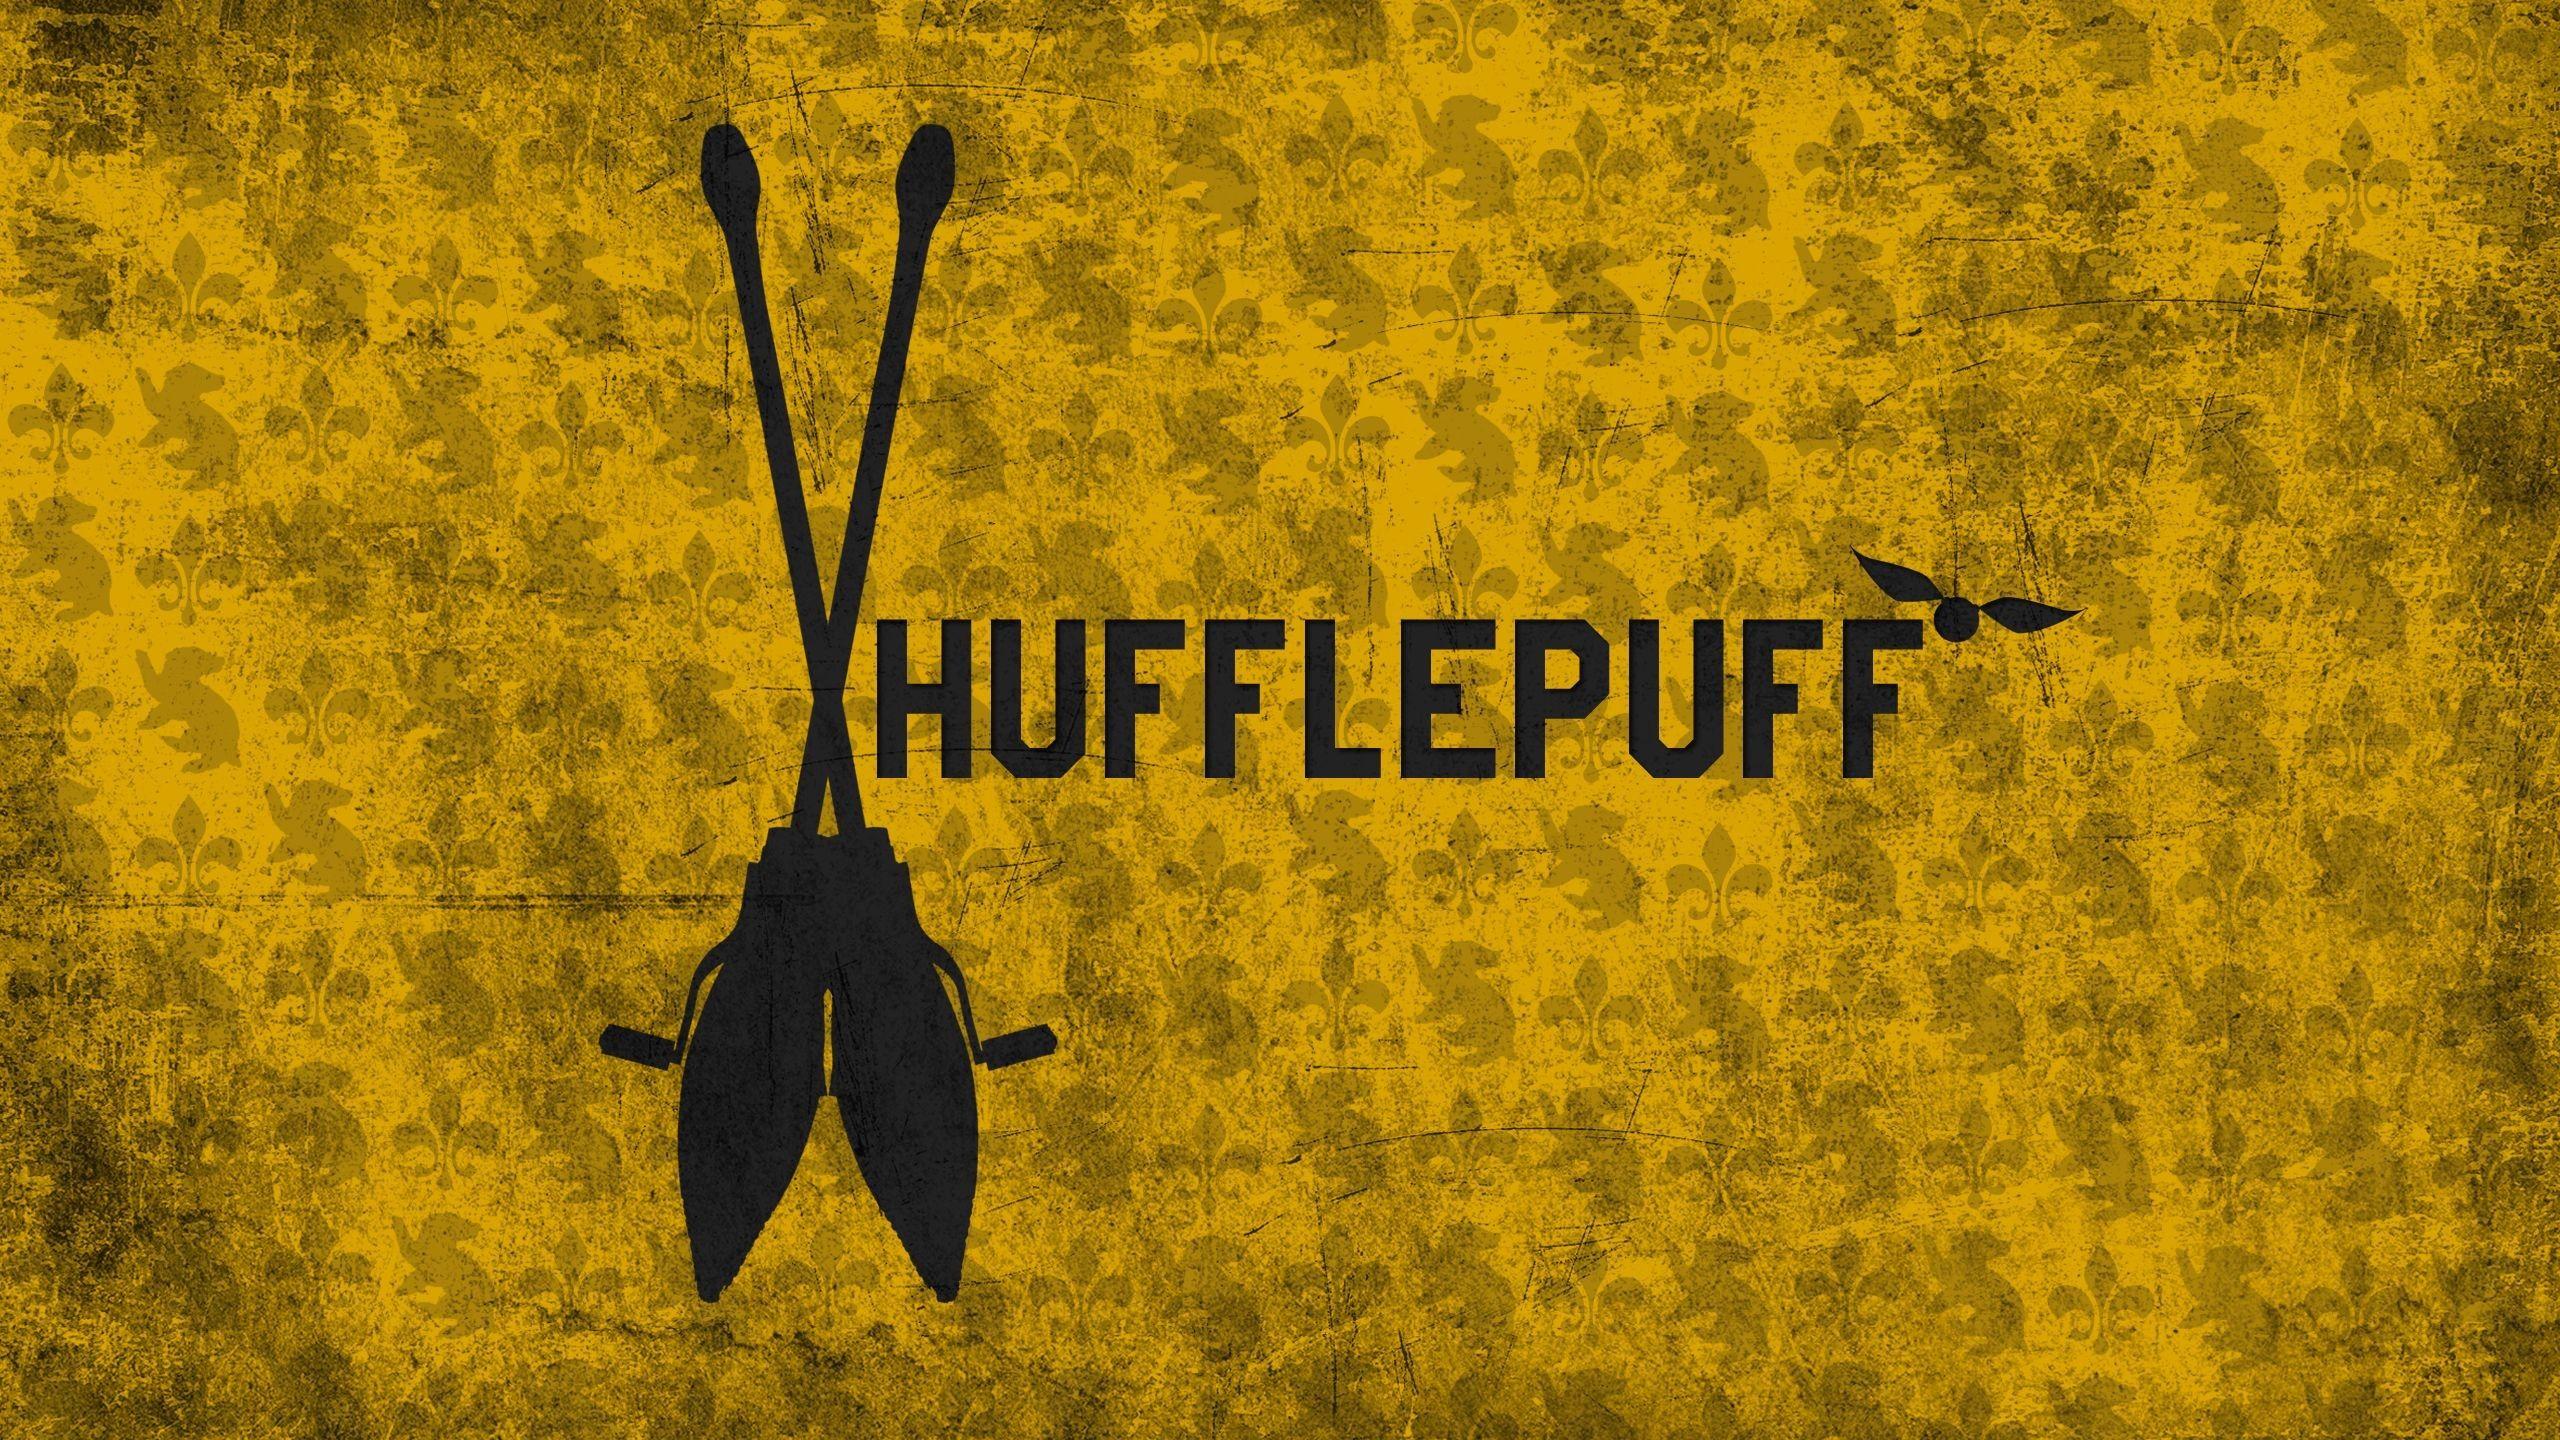 Hufflepuff Aesthetic Wallpapers Top Free Hufflepuff Aesthetic Backgrounds Wallpaperaccess